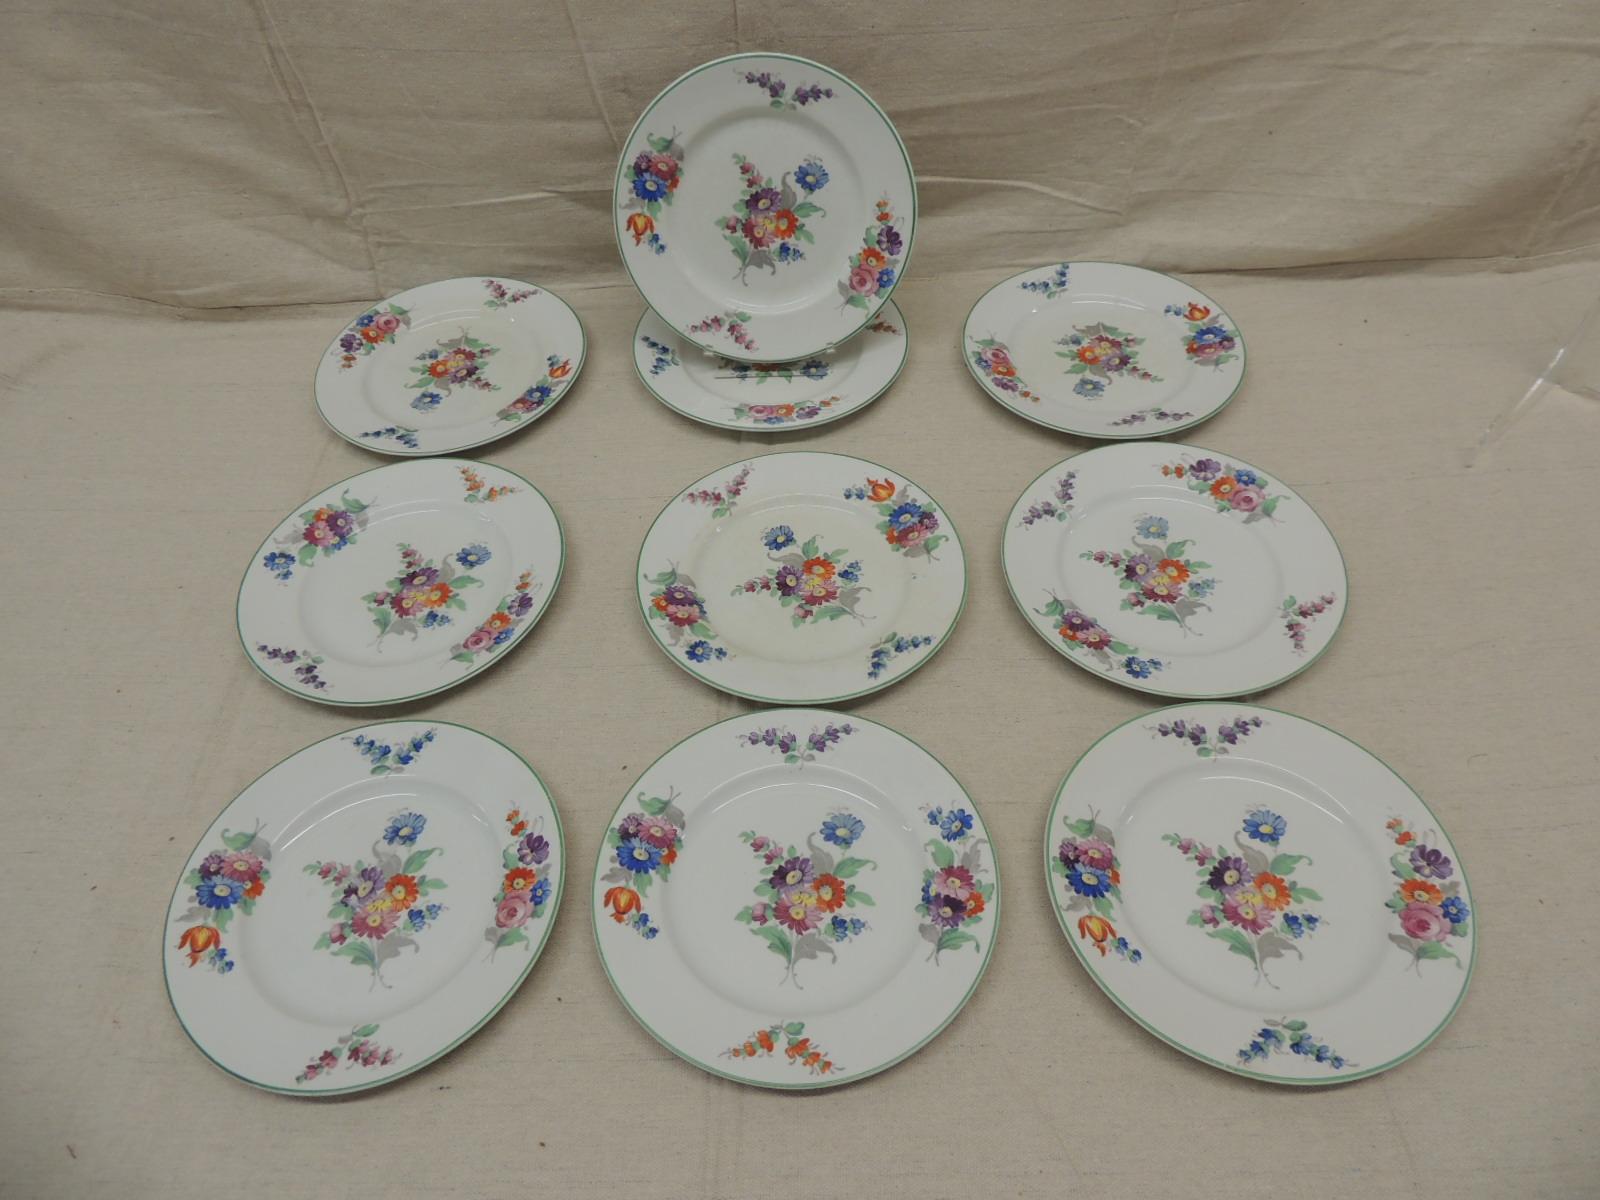 Set of (10) Wood & Sons floral porcelain dessert plates.
Floral bouquet in shades of blue, red, green, yellow and orange.
Size: 8